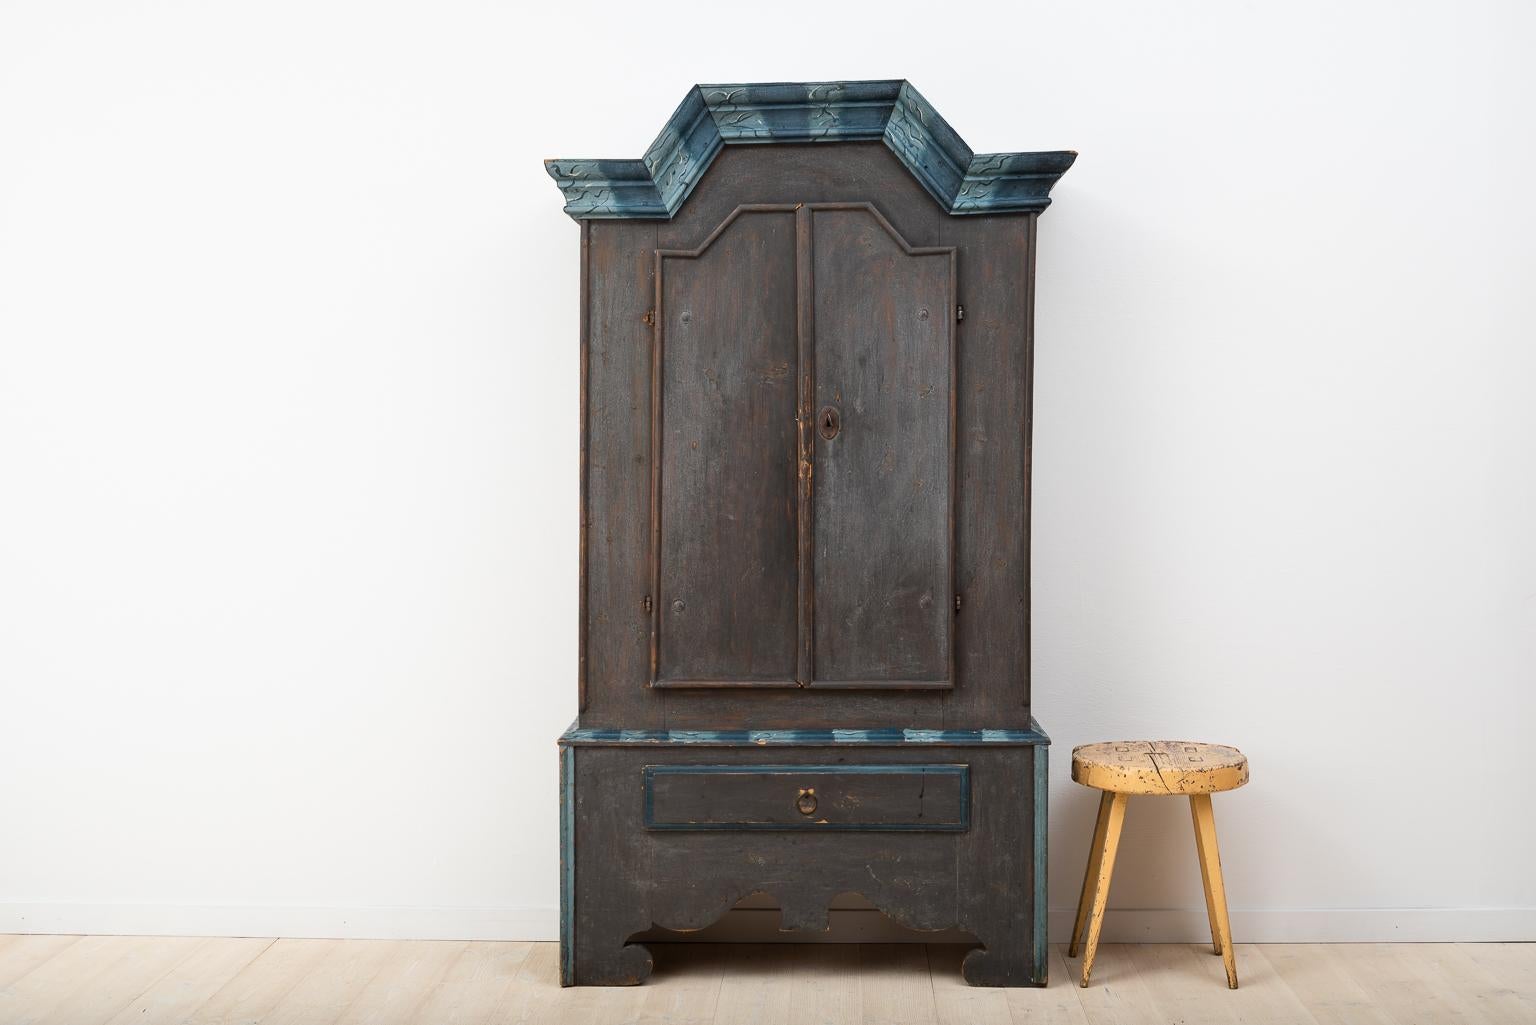 Charming rare Folk Art cupboard from Jämtland. Manufactured late 1700s. The model was manufactured in an area called Haga which is why this type with the straight crown and raised middle is often called Haga cabinets. Original paint with marbled